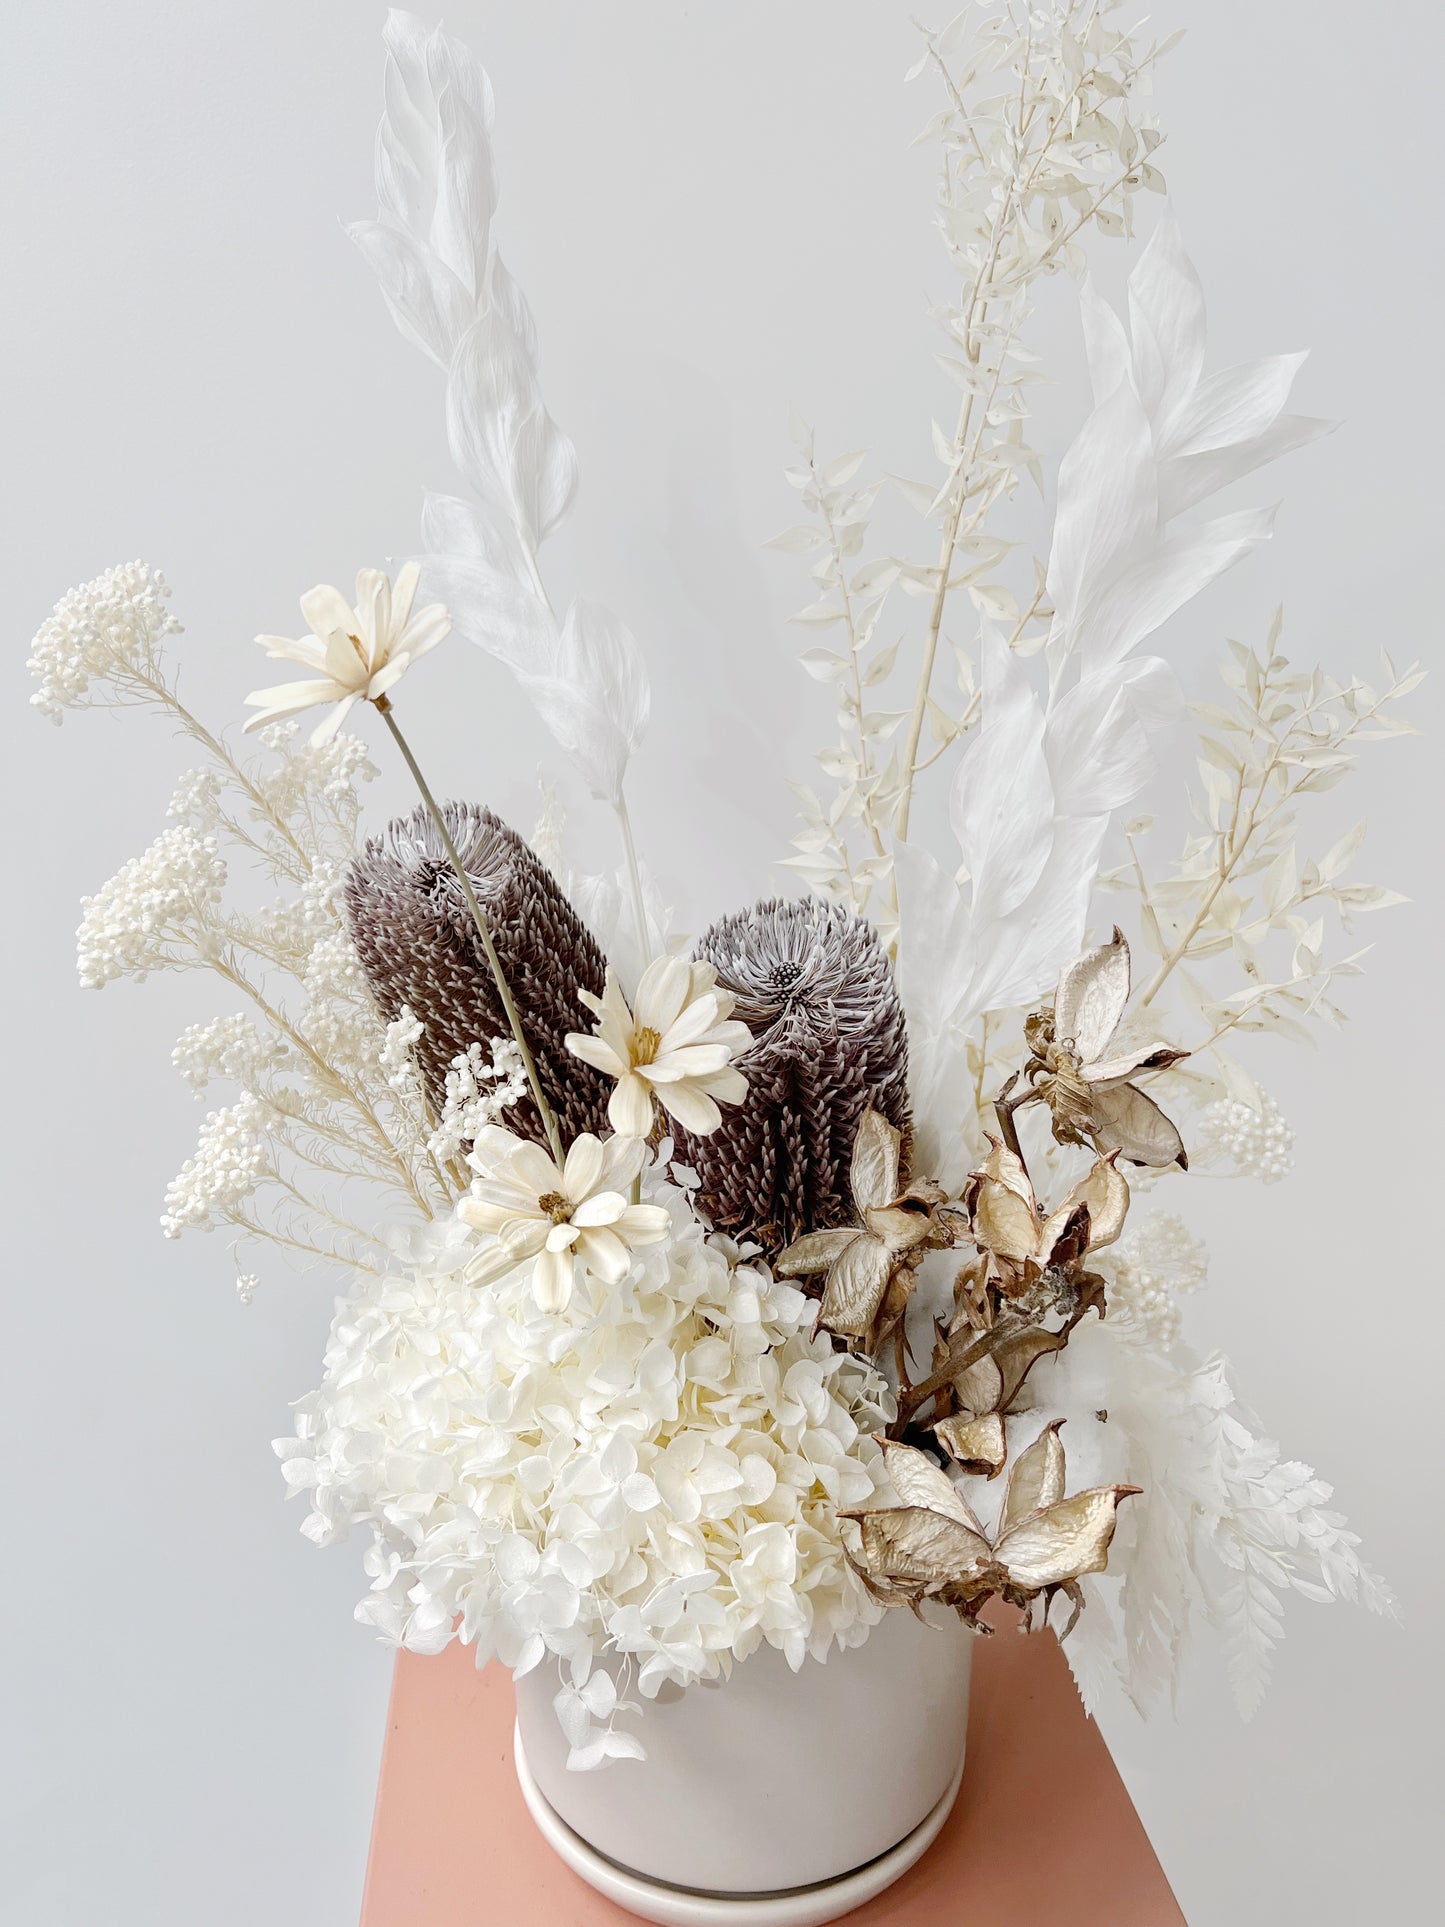 An everlasting flower arrangement in whites and native focals.